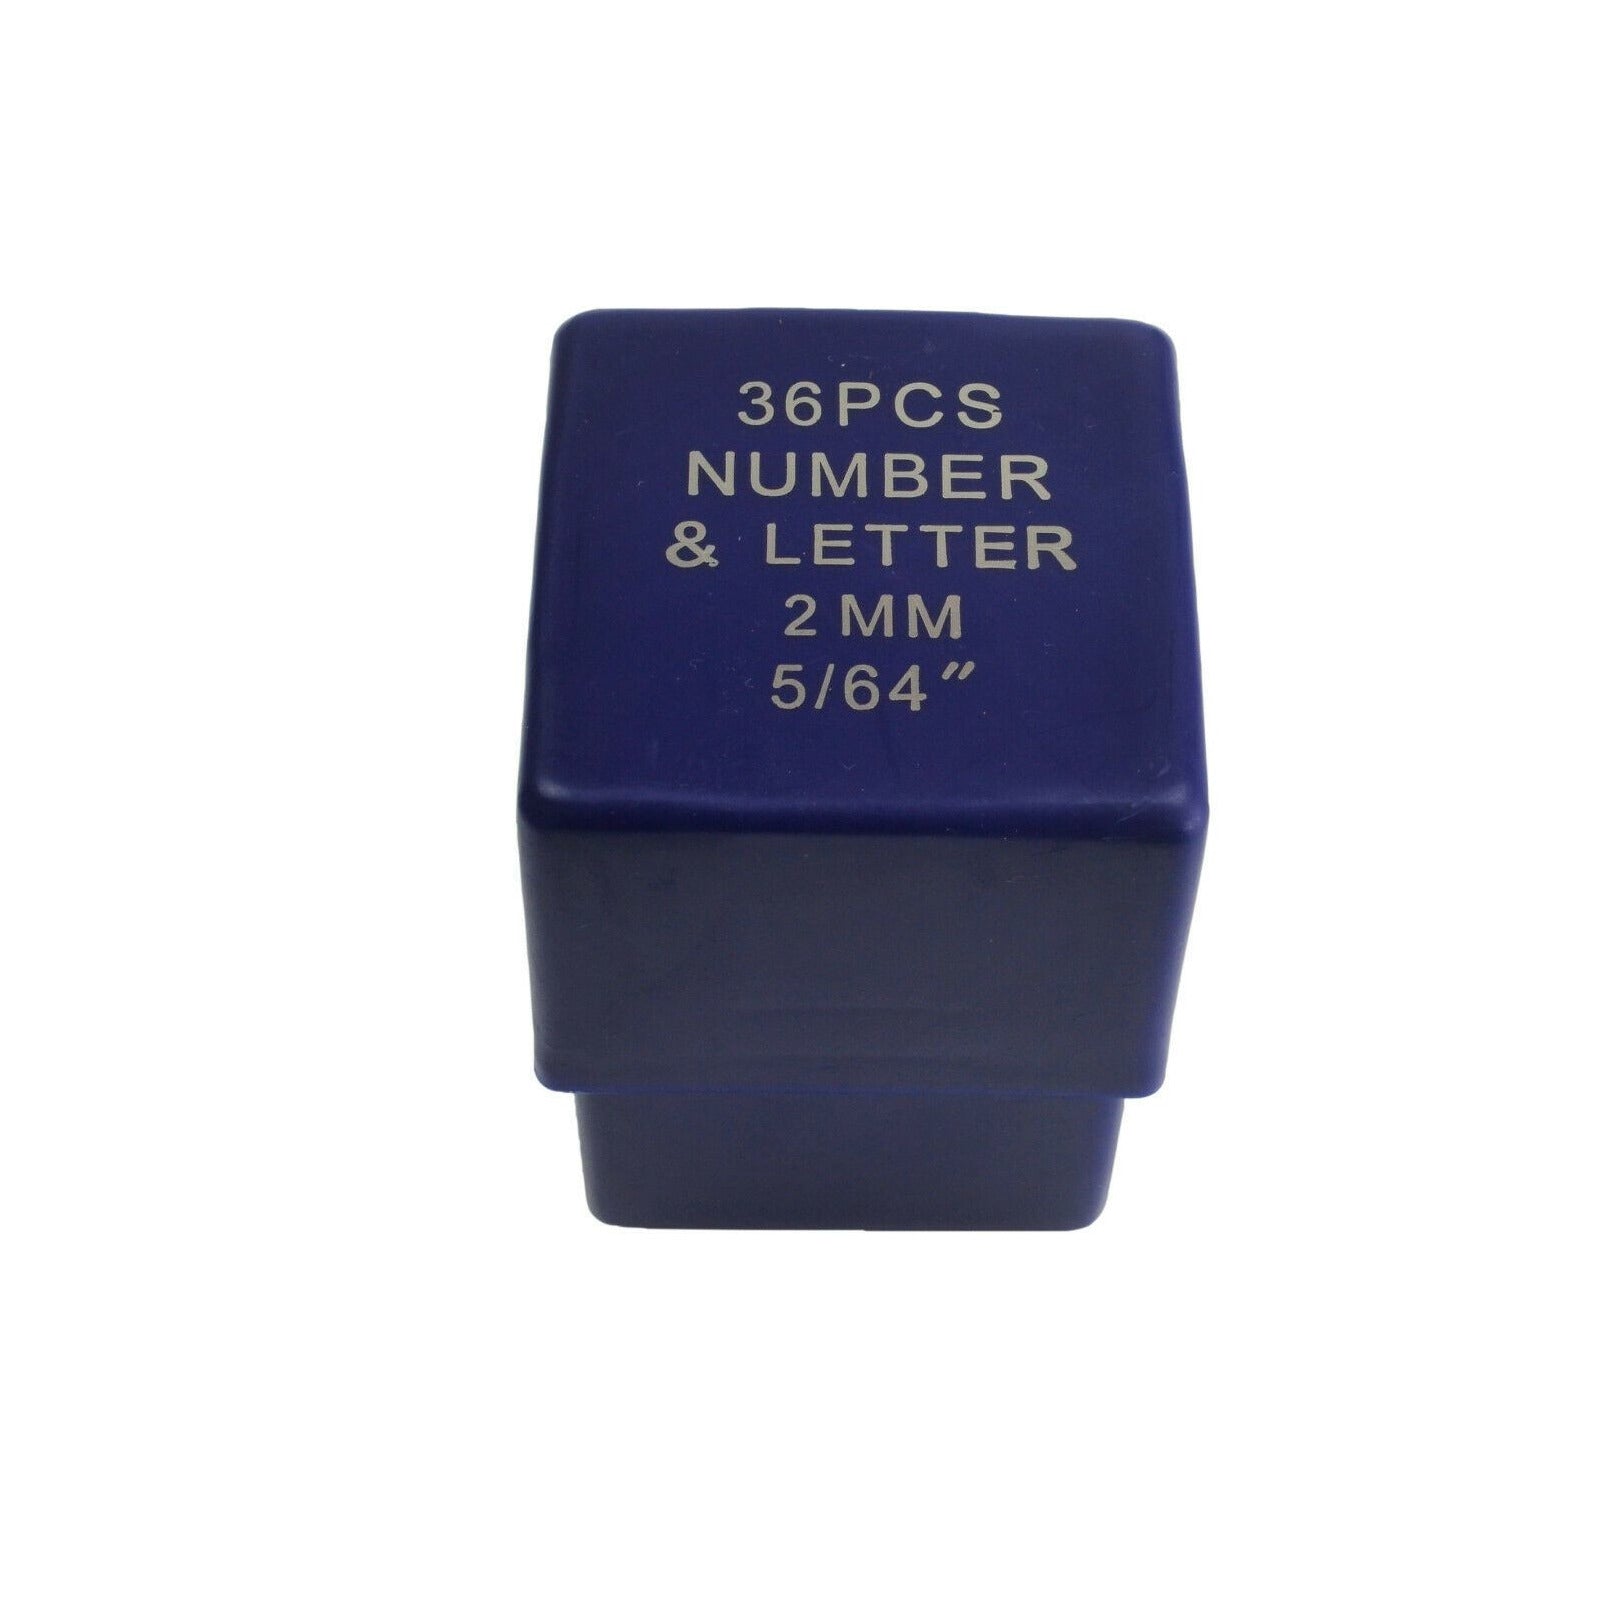 36pc x 2 mm or 5/64" Letter & number stamp punch (A-Z & 0-9)